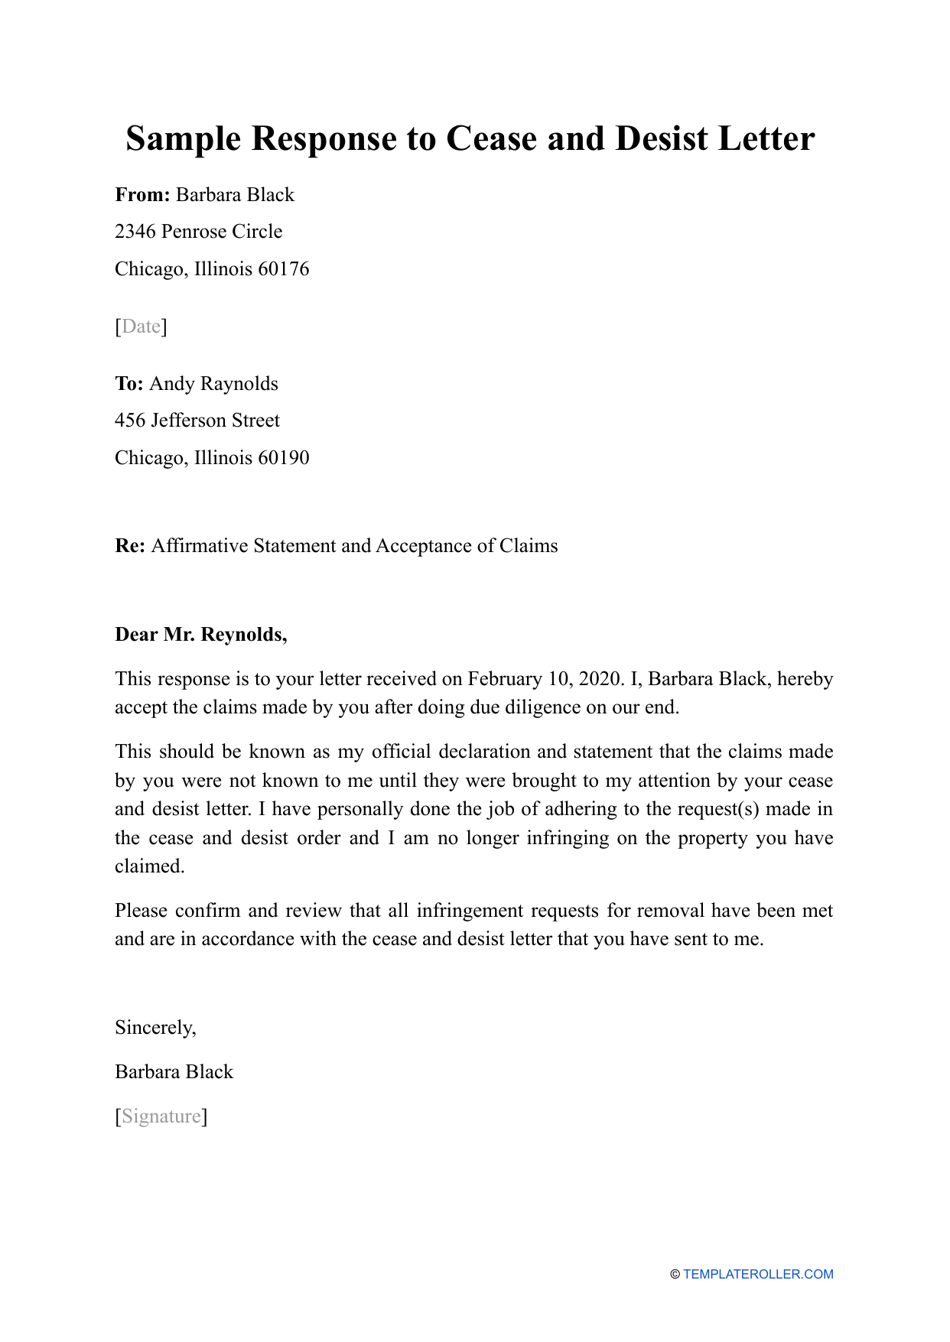 Sample Response To Cease And Desist Letter Download Printable Pdf Templateroller